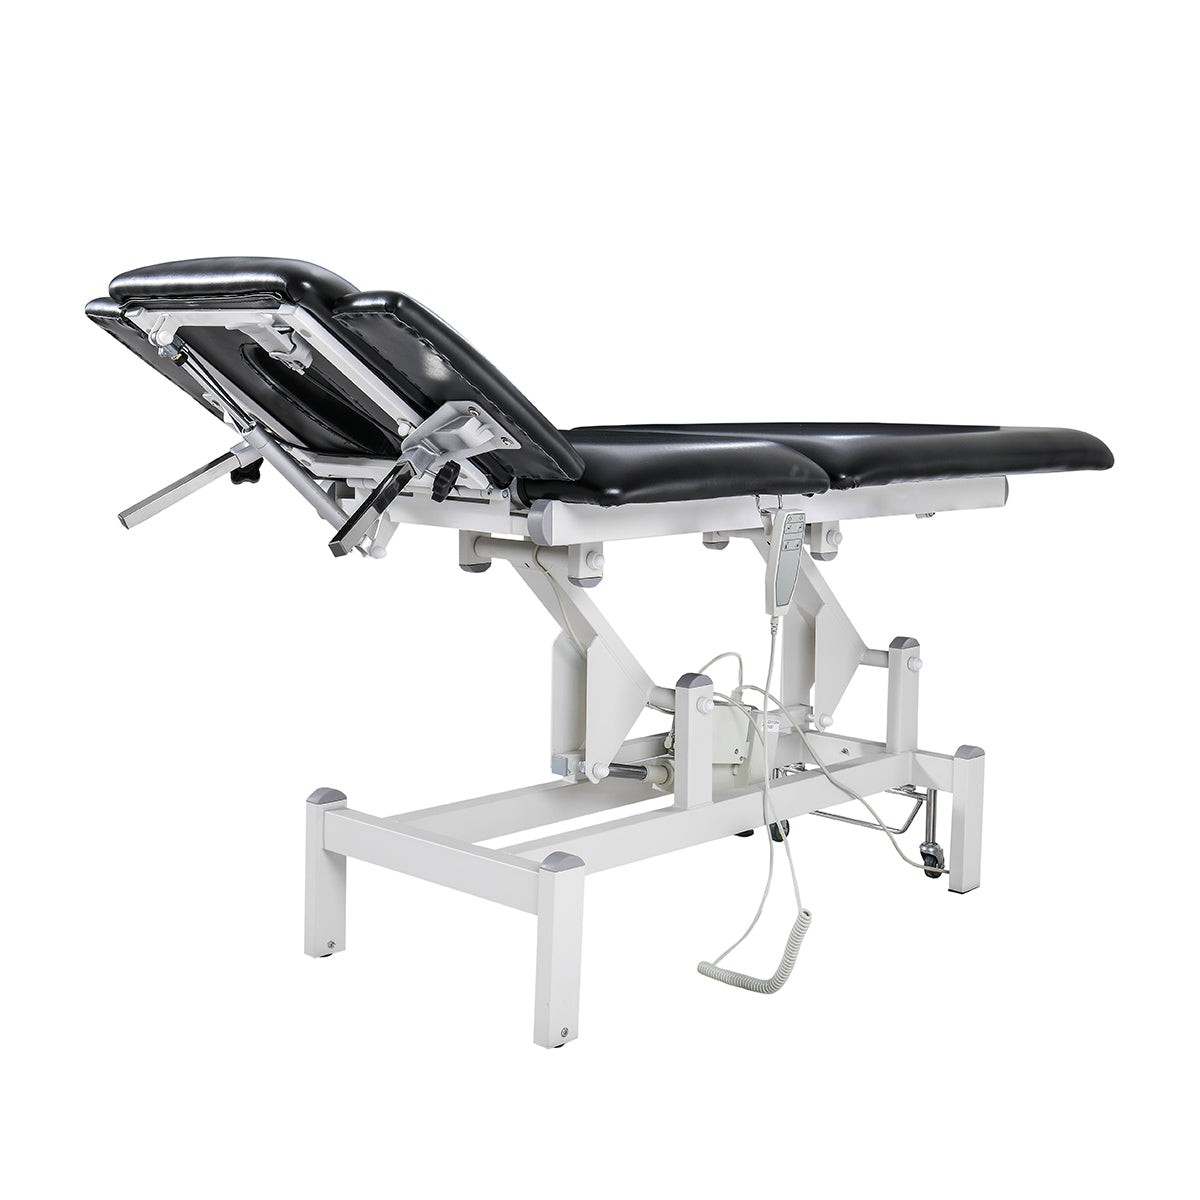 Hygieia 3 Section Electric Massage Bed Physiotherapy bed 2 Motors